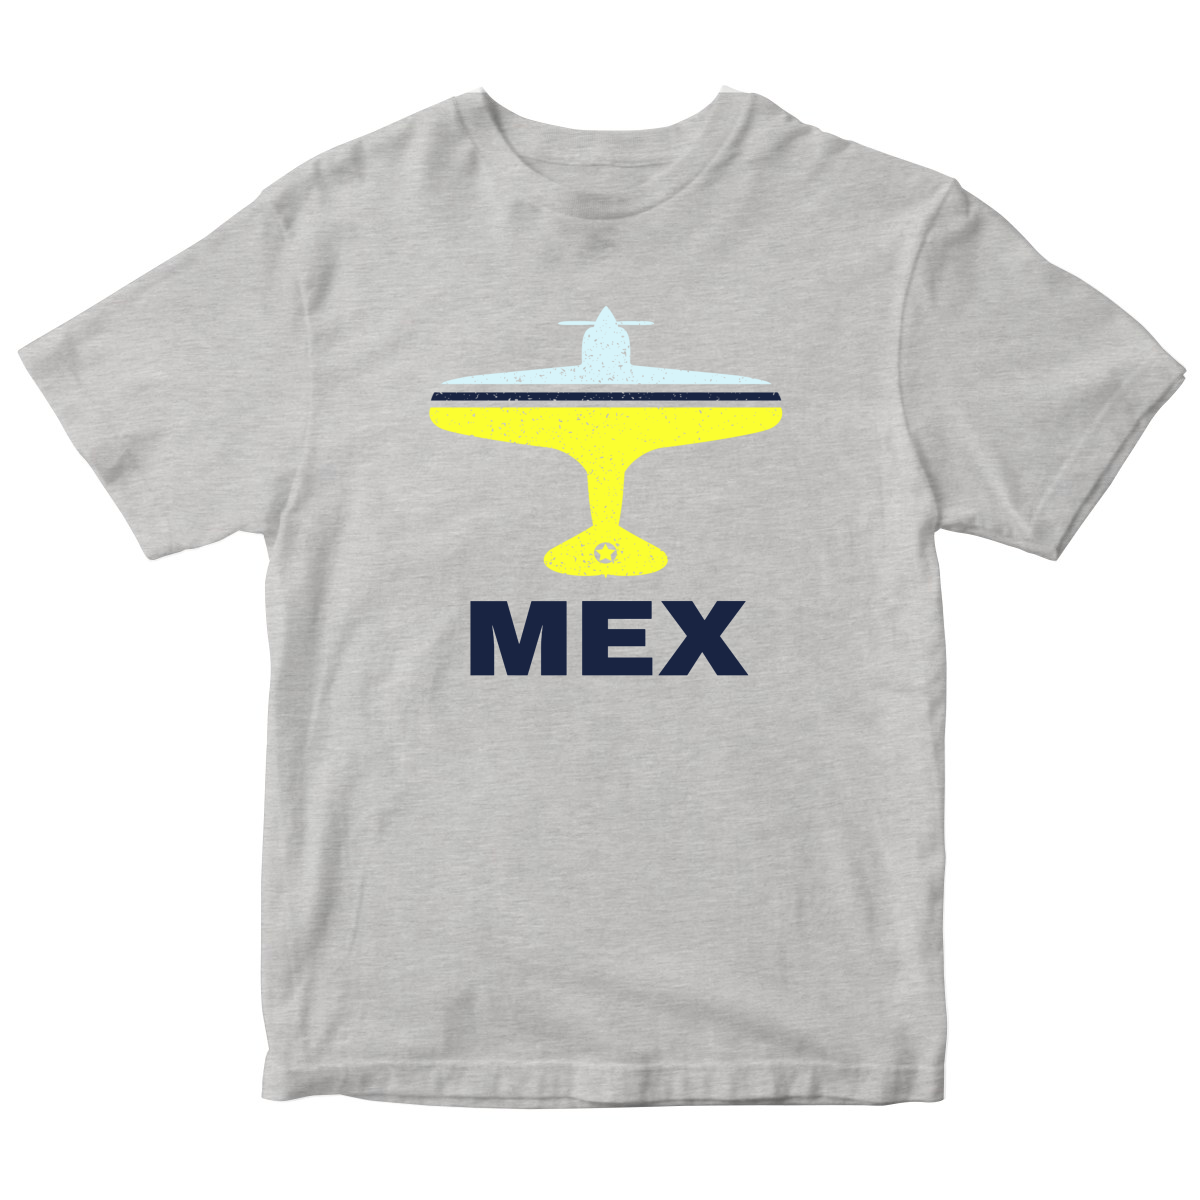 Fly Mexico City MEX Airport  Kids T-shirt | Gray